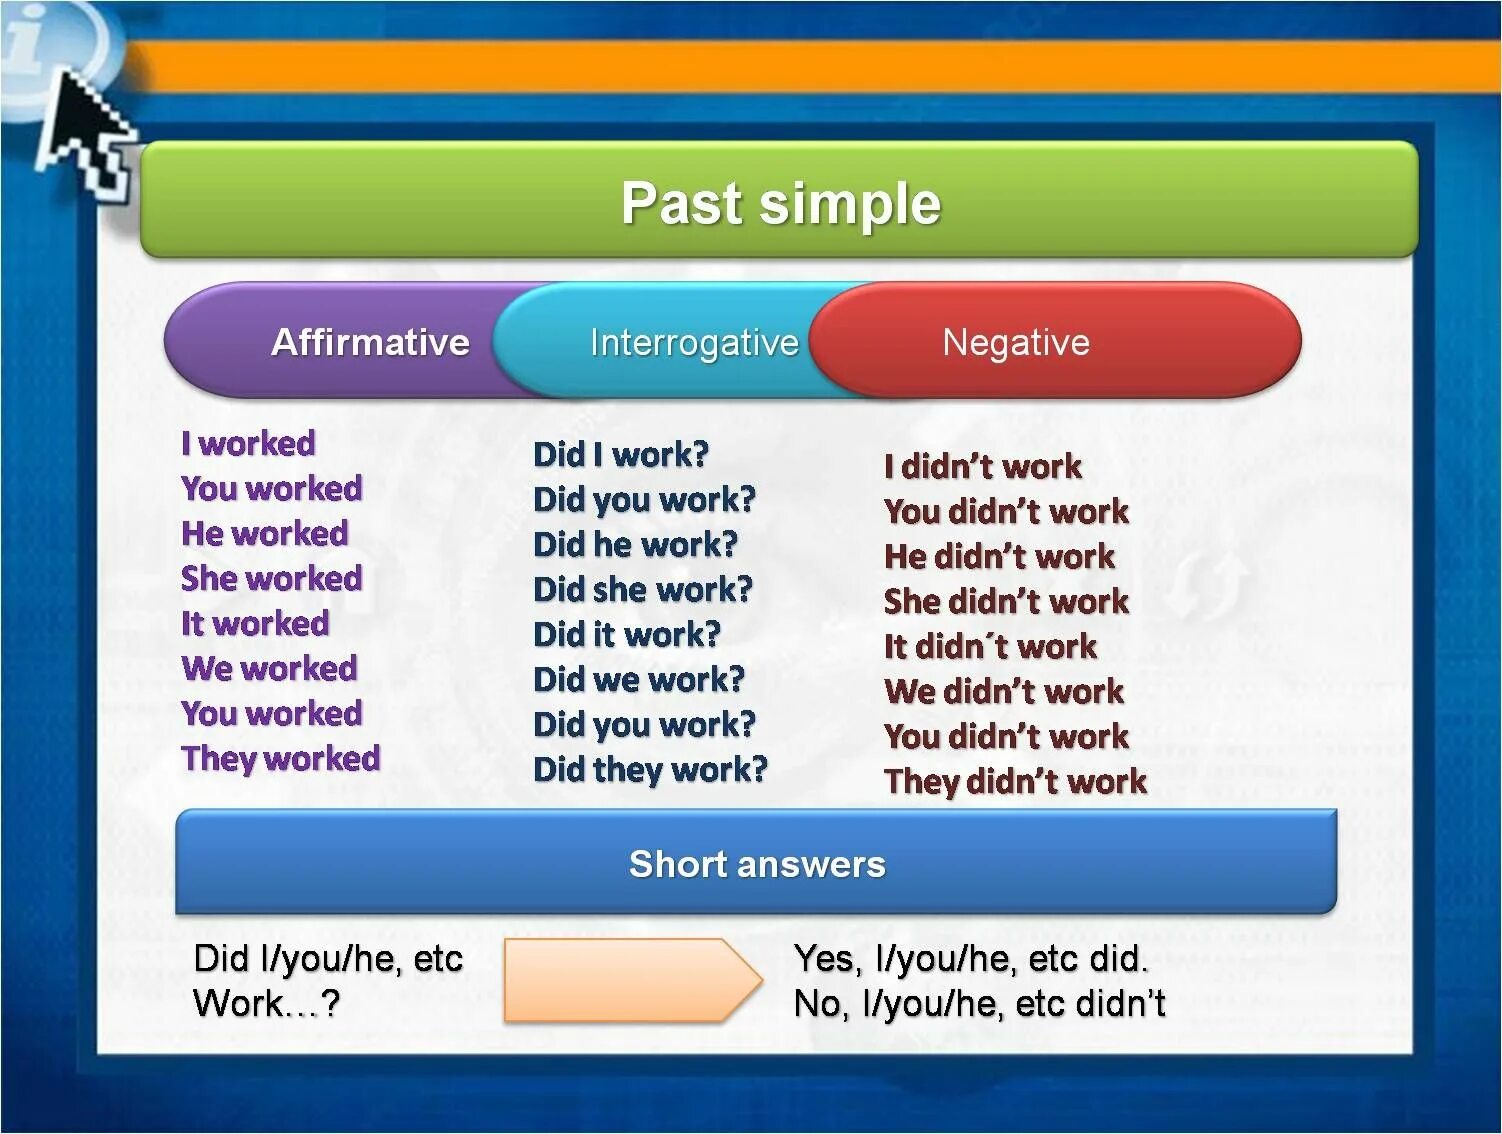 Past'simple. Past simple affirmative правило. Pa simple. Past simple past and interrogative. Discover формы